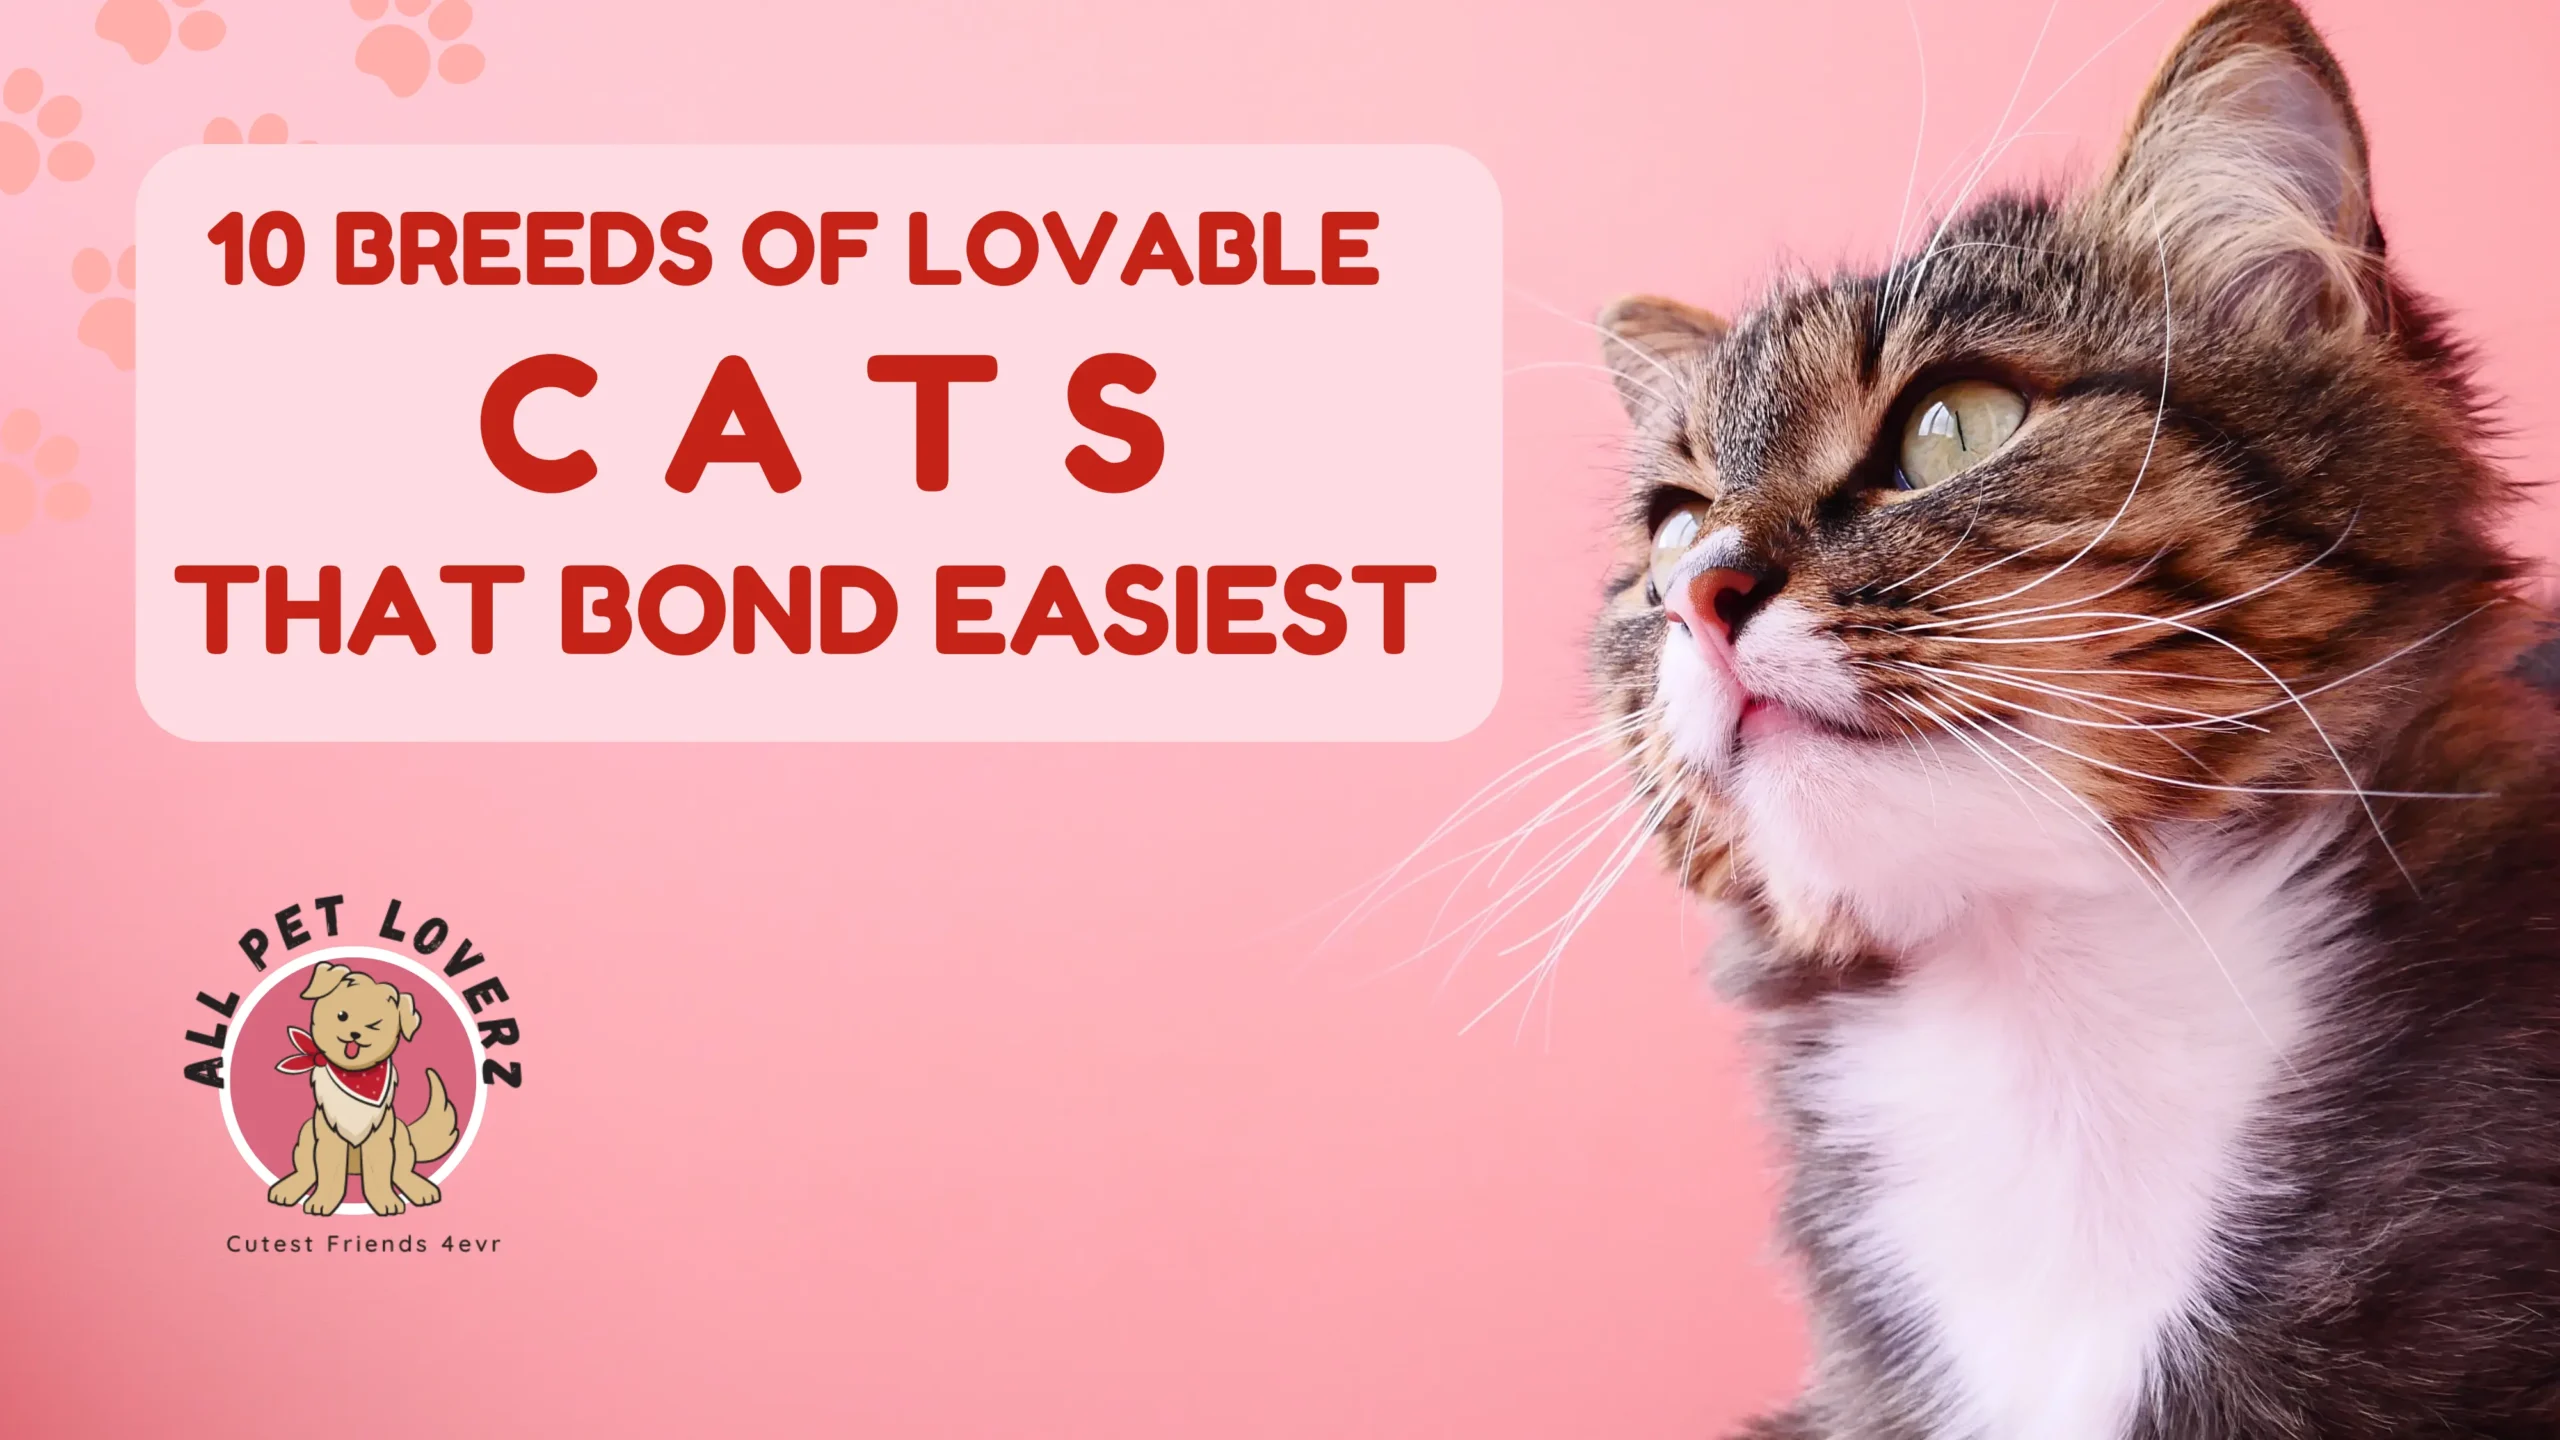 10 Breeds of Lovable Cats That Bond Easiest